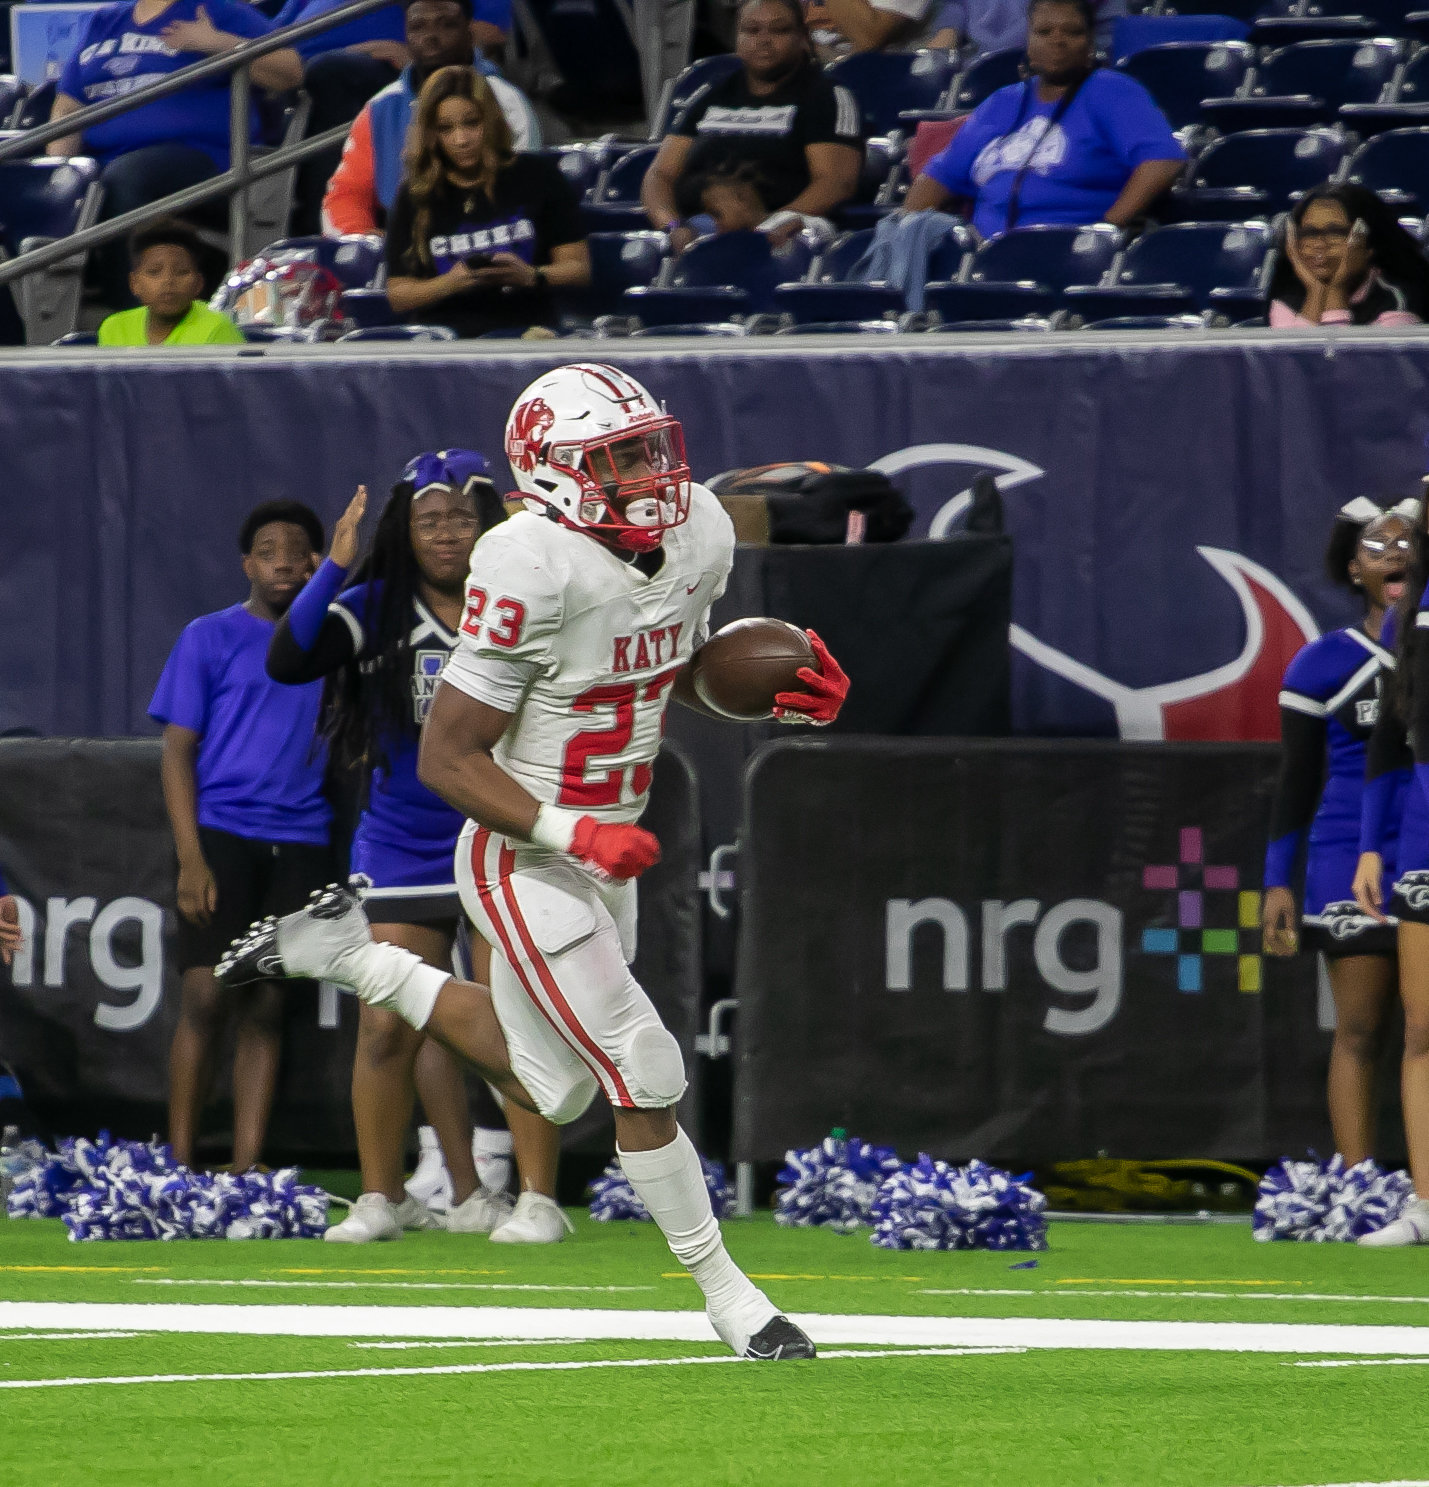 Seth Davis runs in a touchdown during Friday's Class 6A-Divison II Region III Final between Katy and C.E. King at NRG Stadium.